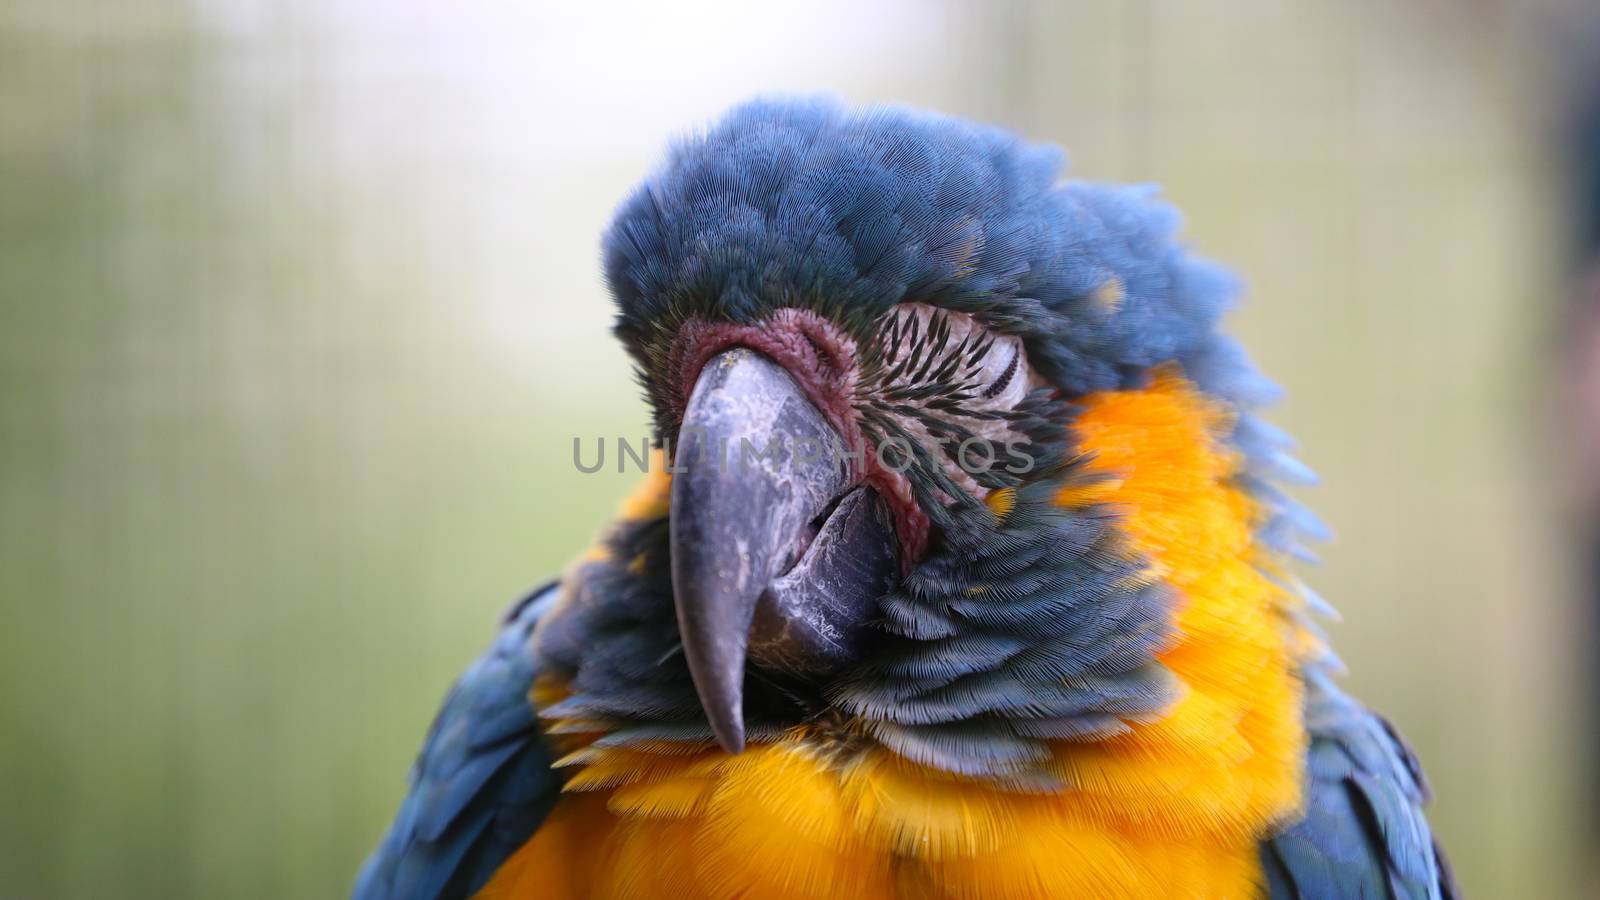 Blue and Yellow Macaw Sleeping - Closeup Portrait